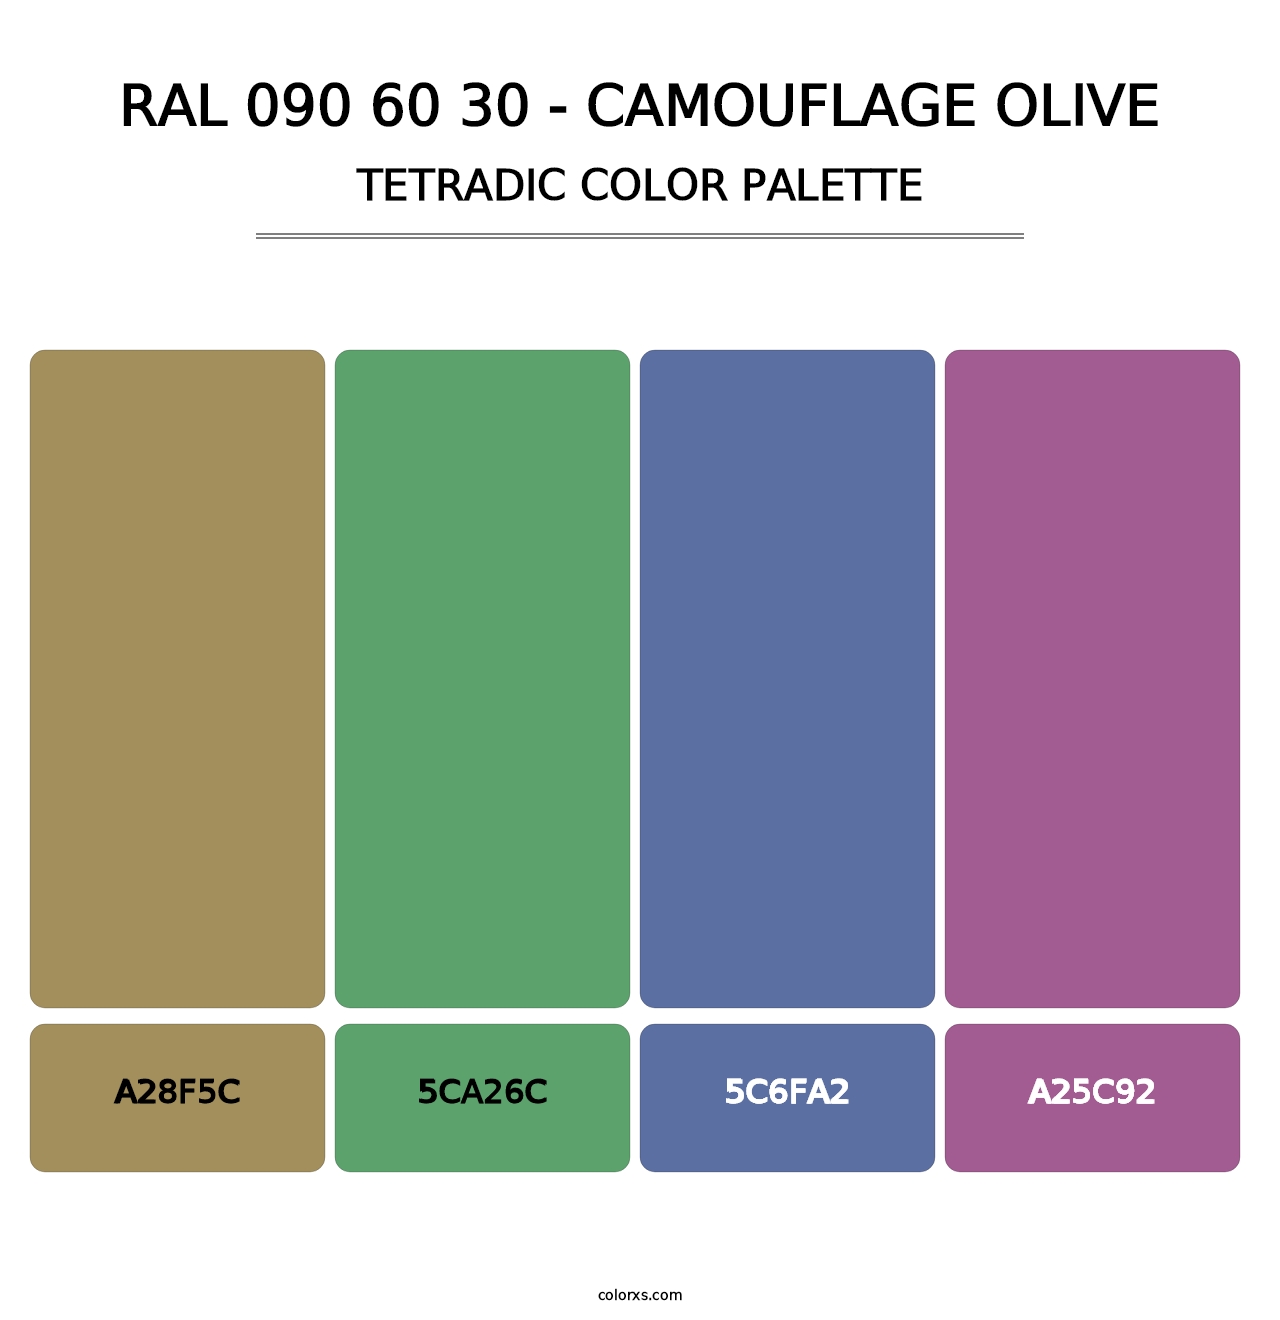 RAL 090 60 30 - Camouflage Olive - Tetradic Color Palette